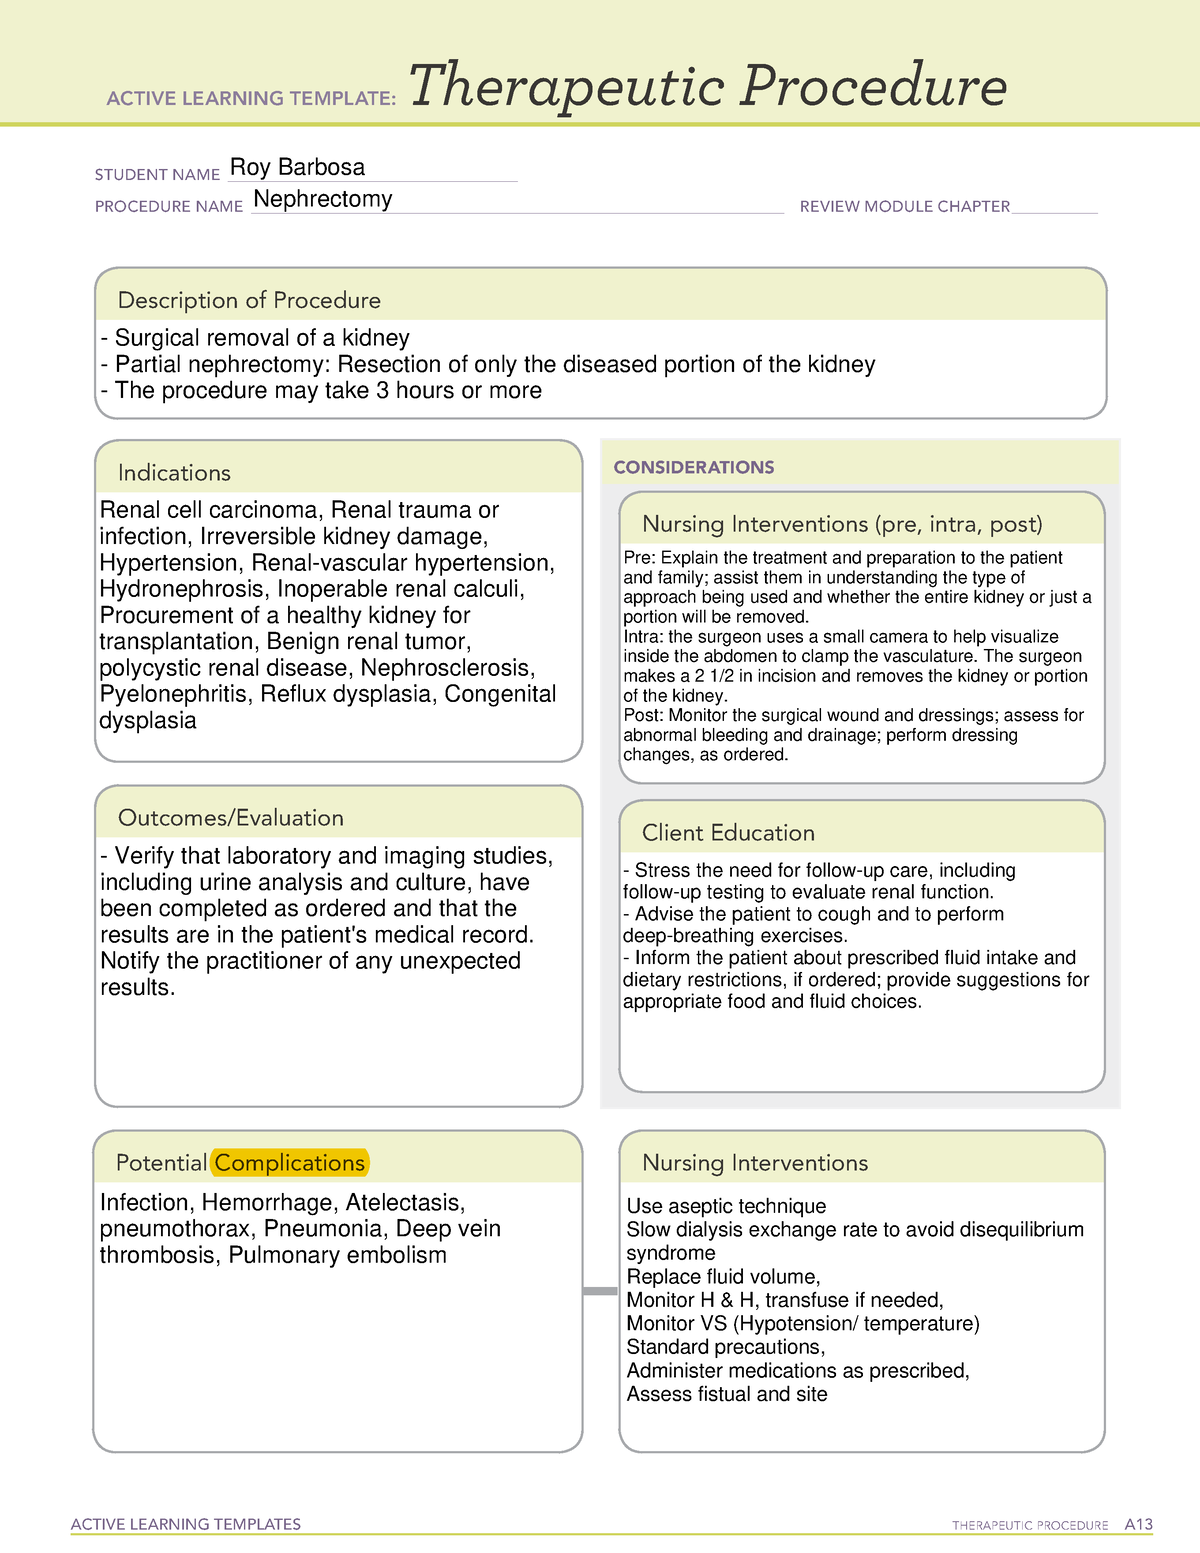 therapeutic-treatment-for-patient-active-learning-templates-therapeutic-procedure-a